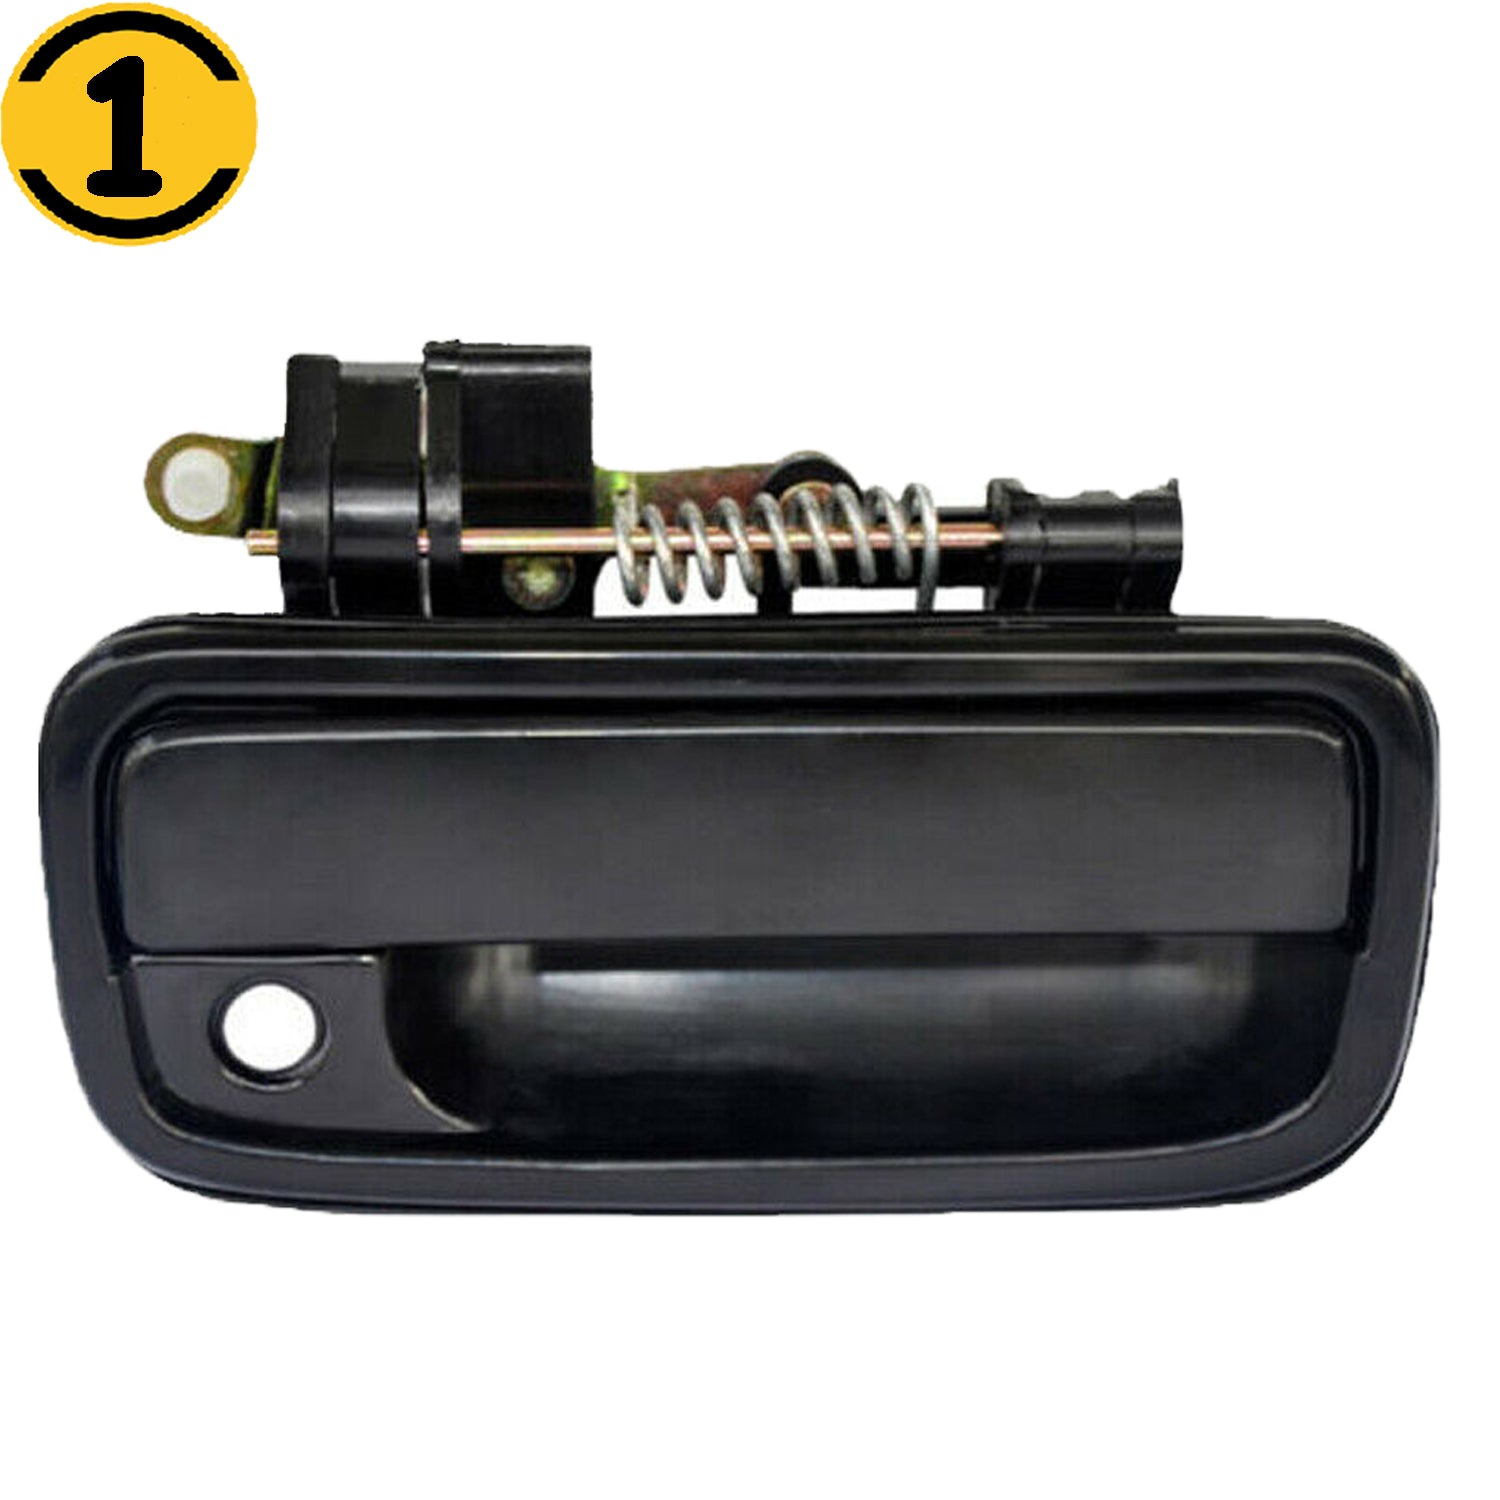 Front Right Exterior Door Handle Fits for Toyota Tacoma Passenger Side Outer Door Handles (Black) MotorbyMotor